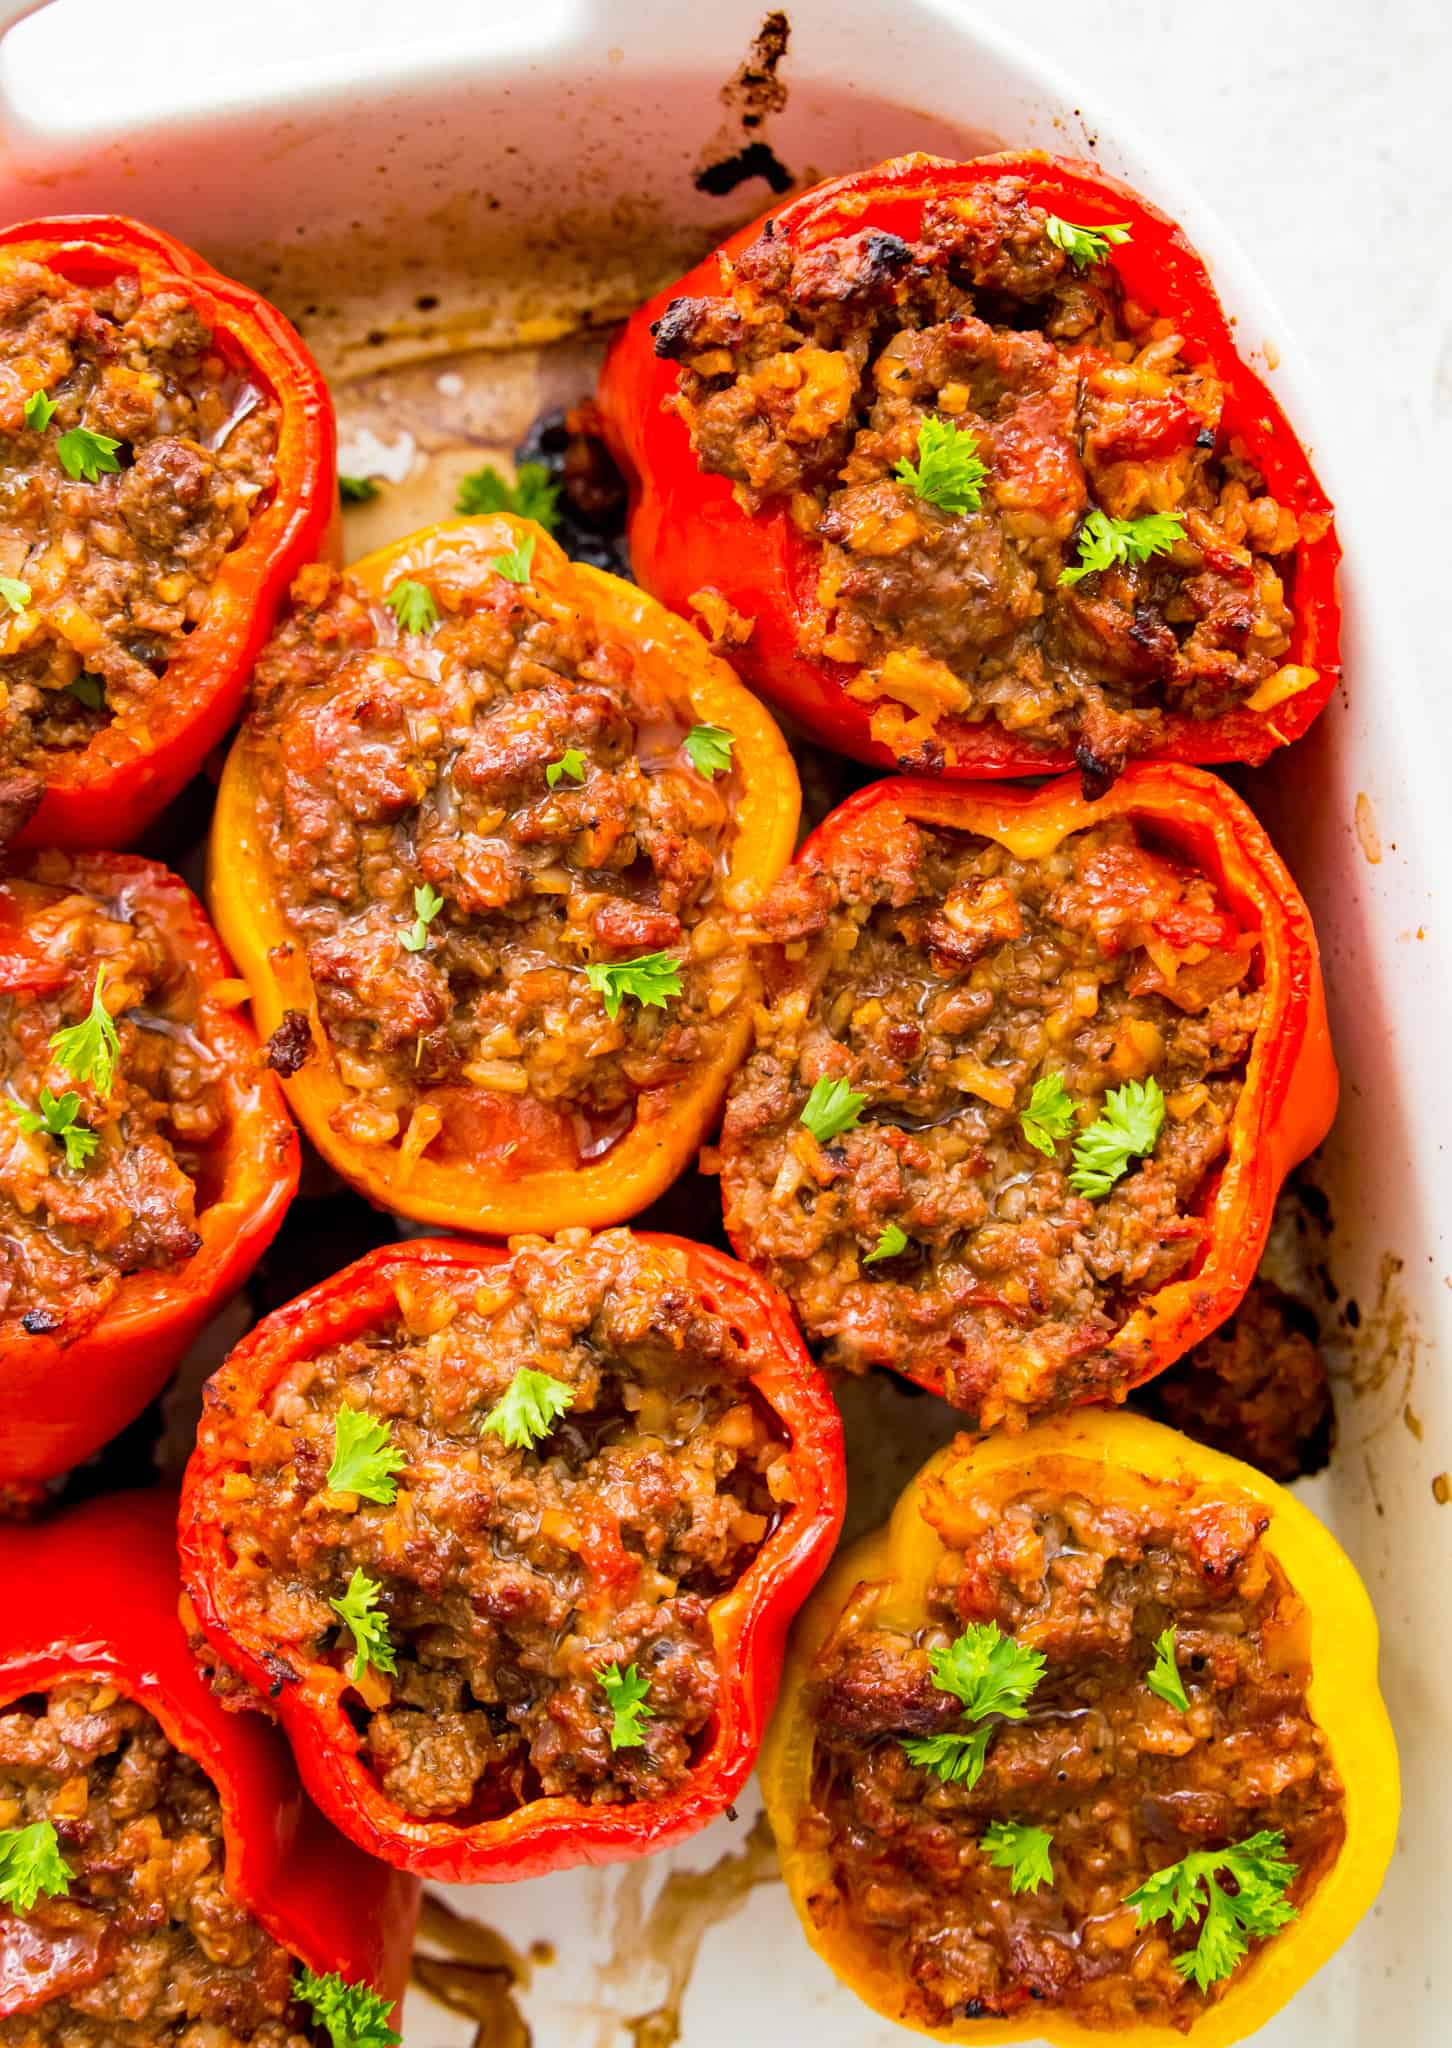 A baking pan full of cooked Whole30 stuffed peppers garnished with cilantro.